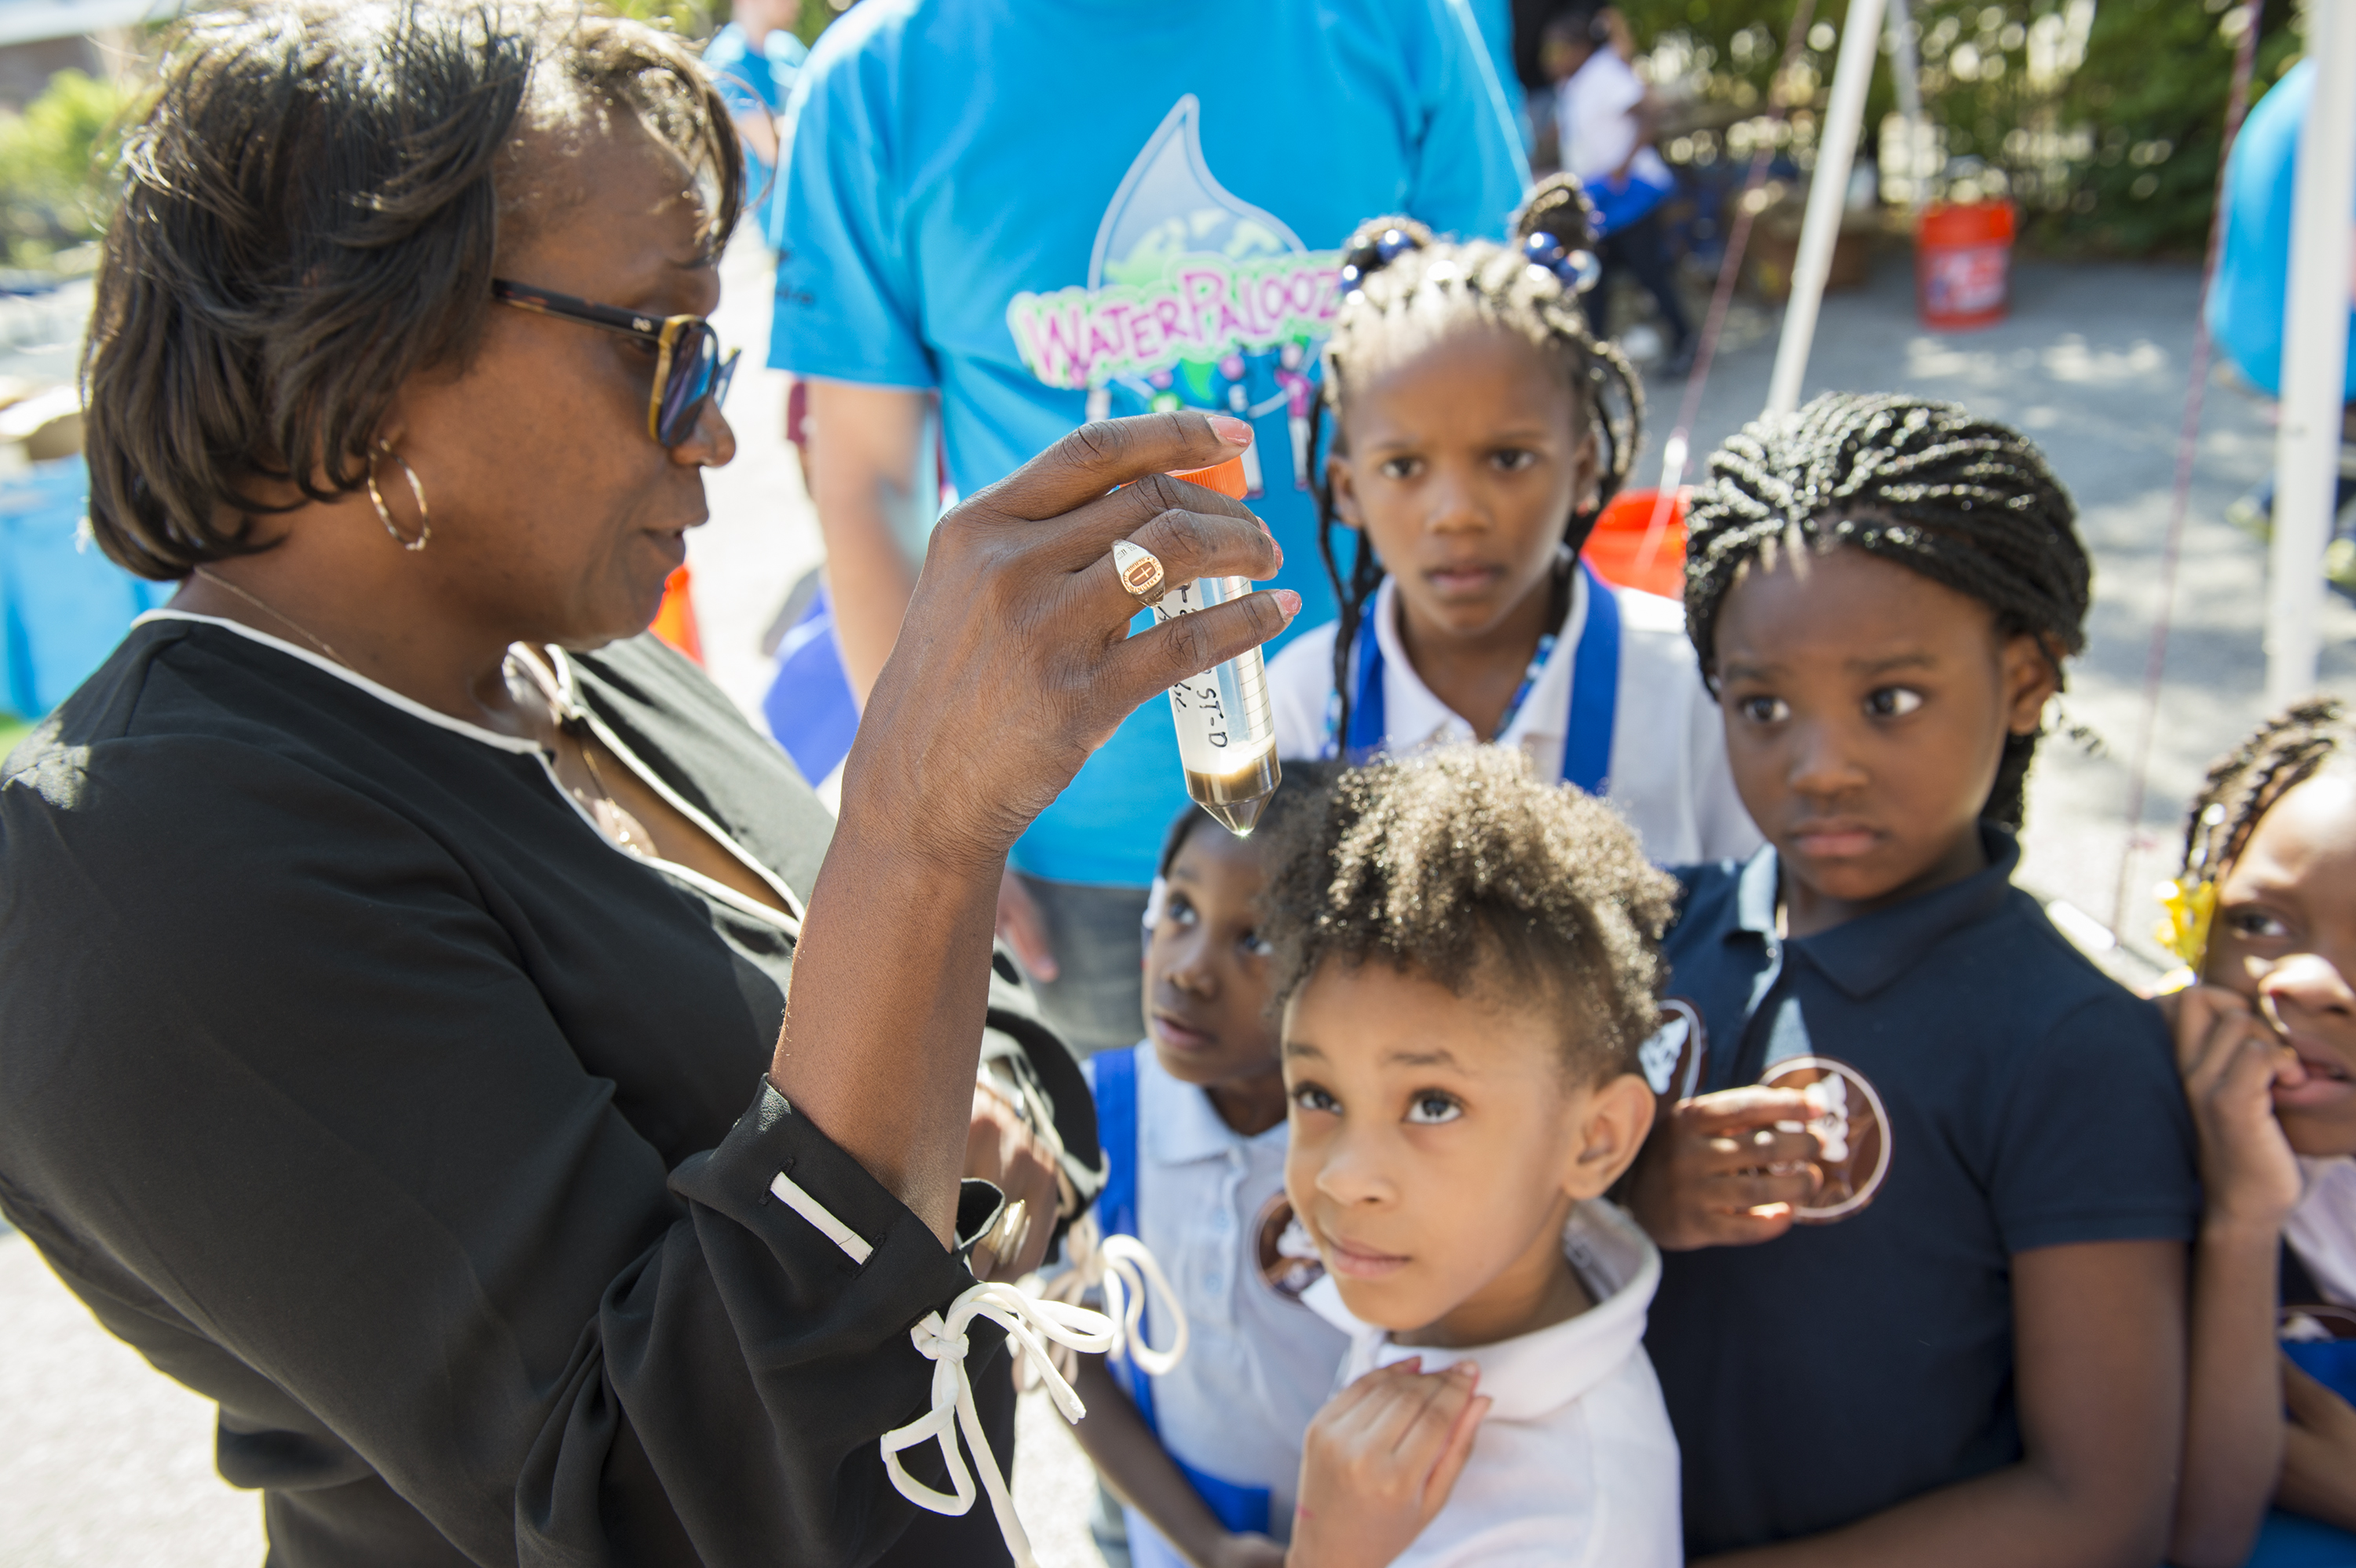 Toni Glymph, Senior Environmental Microbiologist, describes how waste is broken down at water reclamation plants during the WEFTEC 2017 Water Palooza Event at Manierre Elementary School in Chicago.